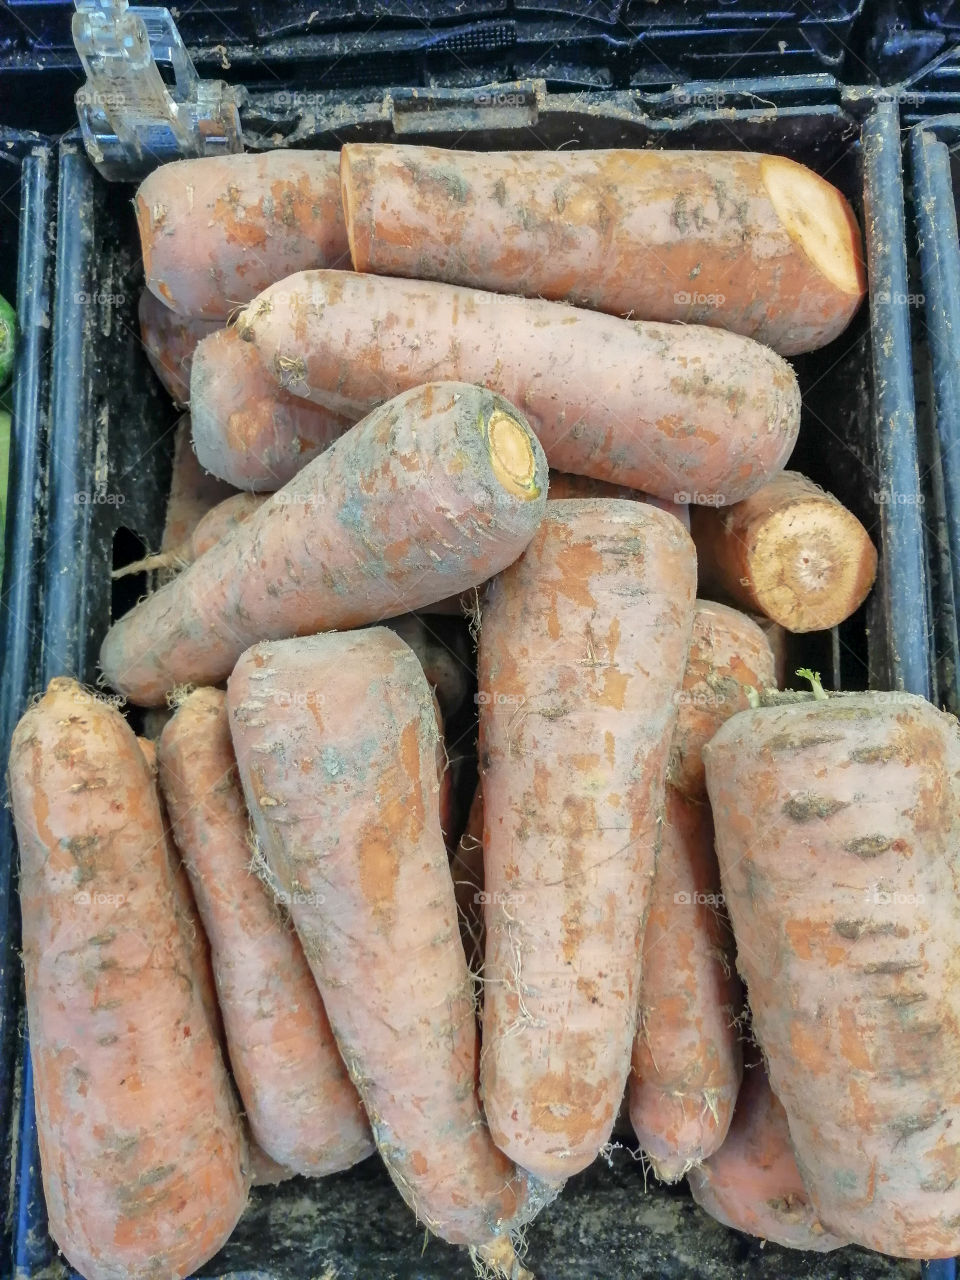 Bulk carrots for sale in a grocery store